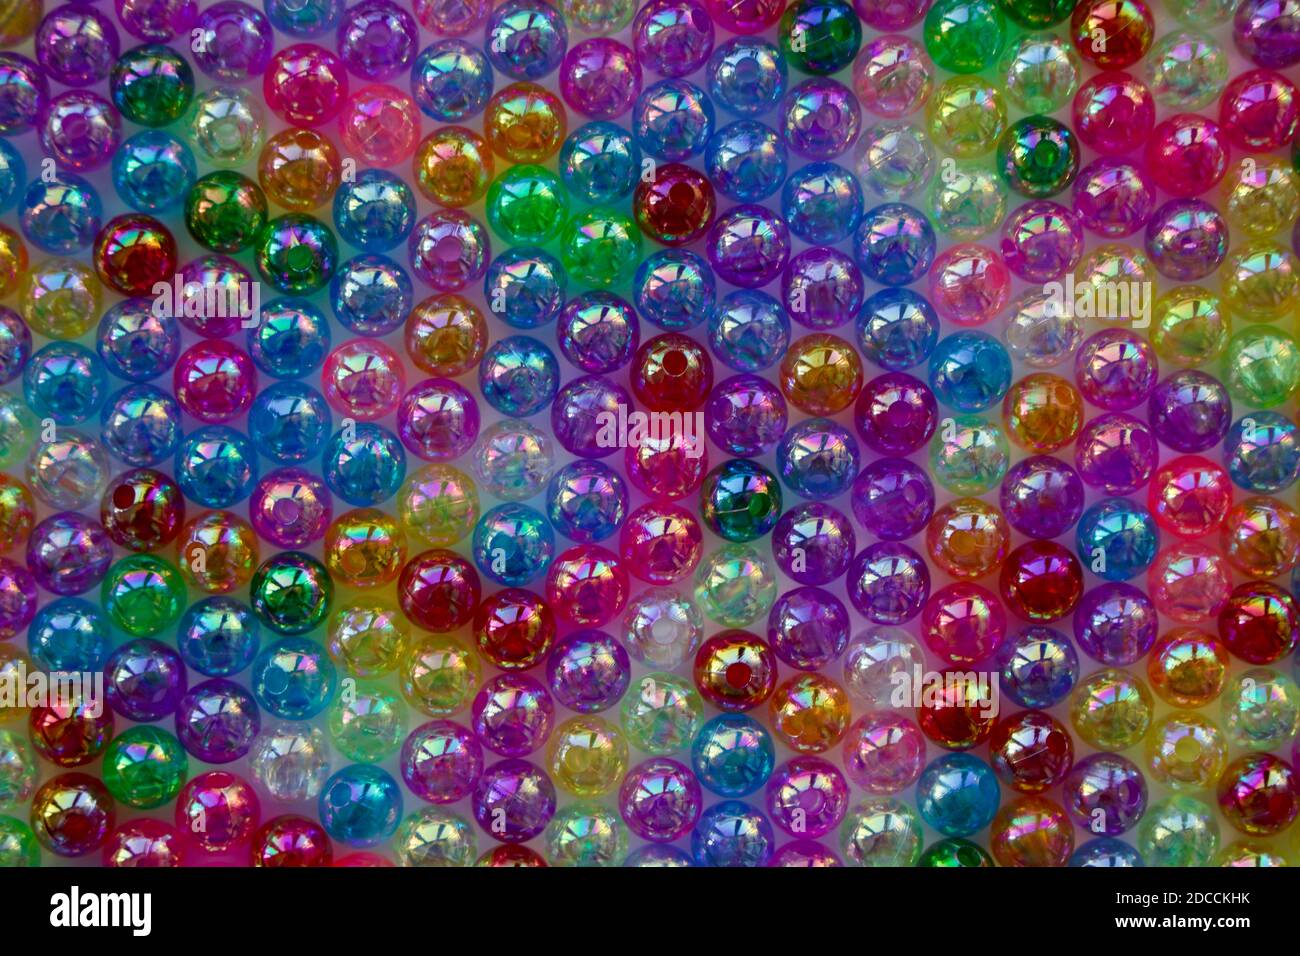 Set of transparent, shiny and many-coloured beads looking like soap bubbles. Seed beads for use in necklaces and bracelets. Stock Photo